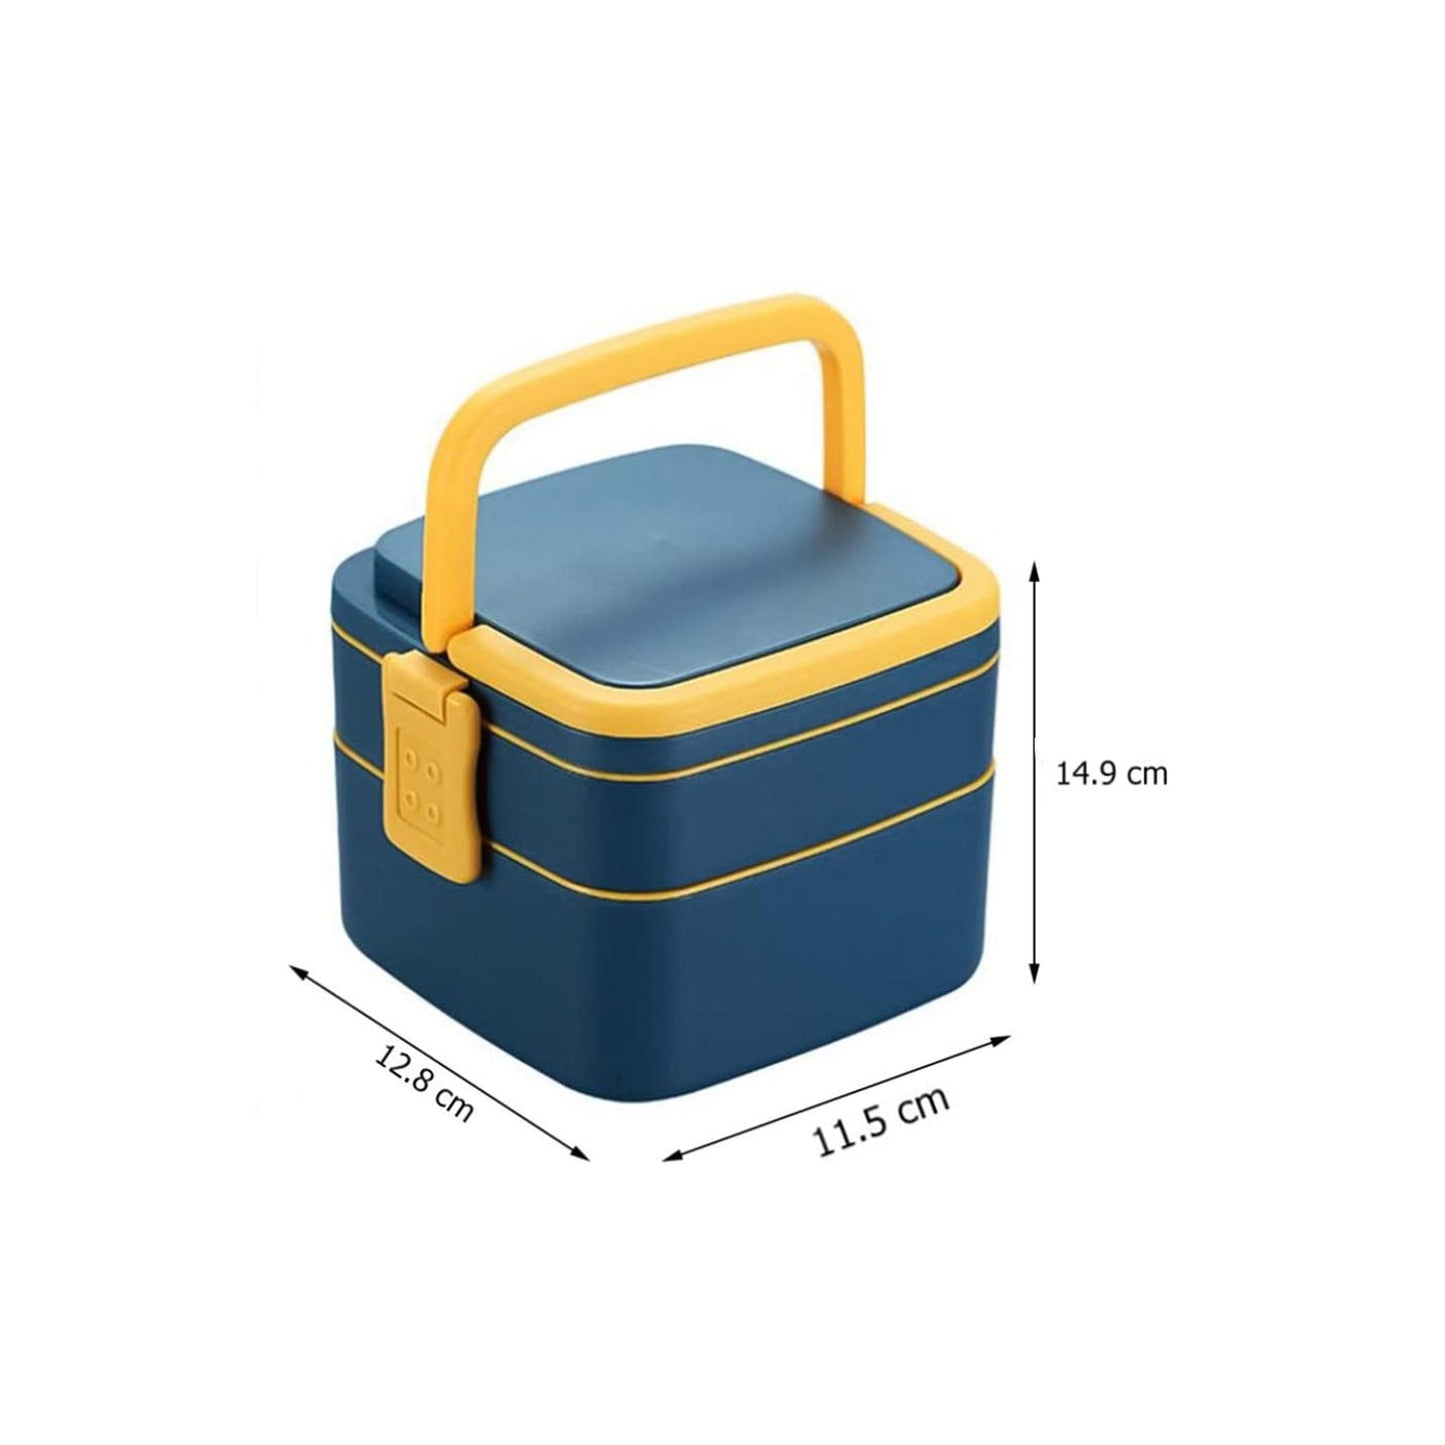 2838A BLUE DOUBLE-LAYER PORTABLE LUNCH BOX STACKABLE WITH CARRYING HANDLE AND SPOON LUNCH BOX , Bento Lunch Box Dukandaily